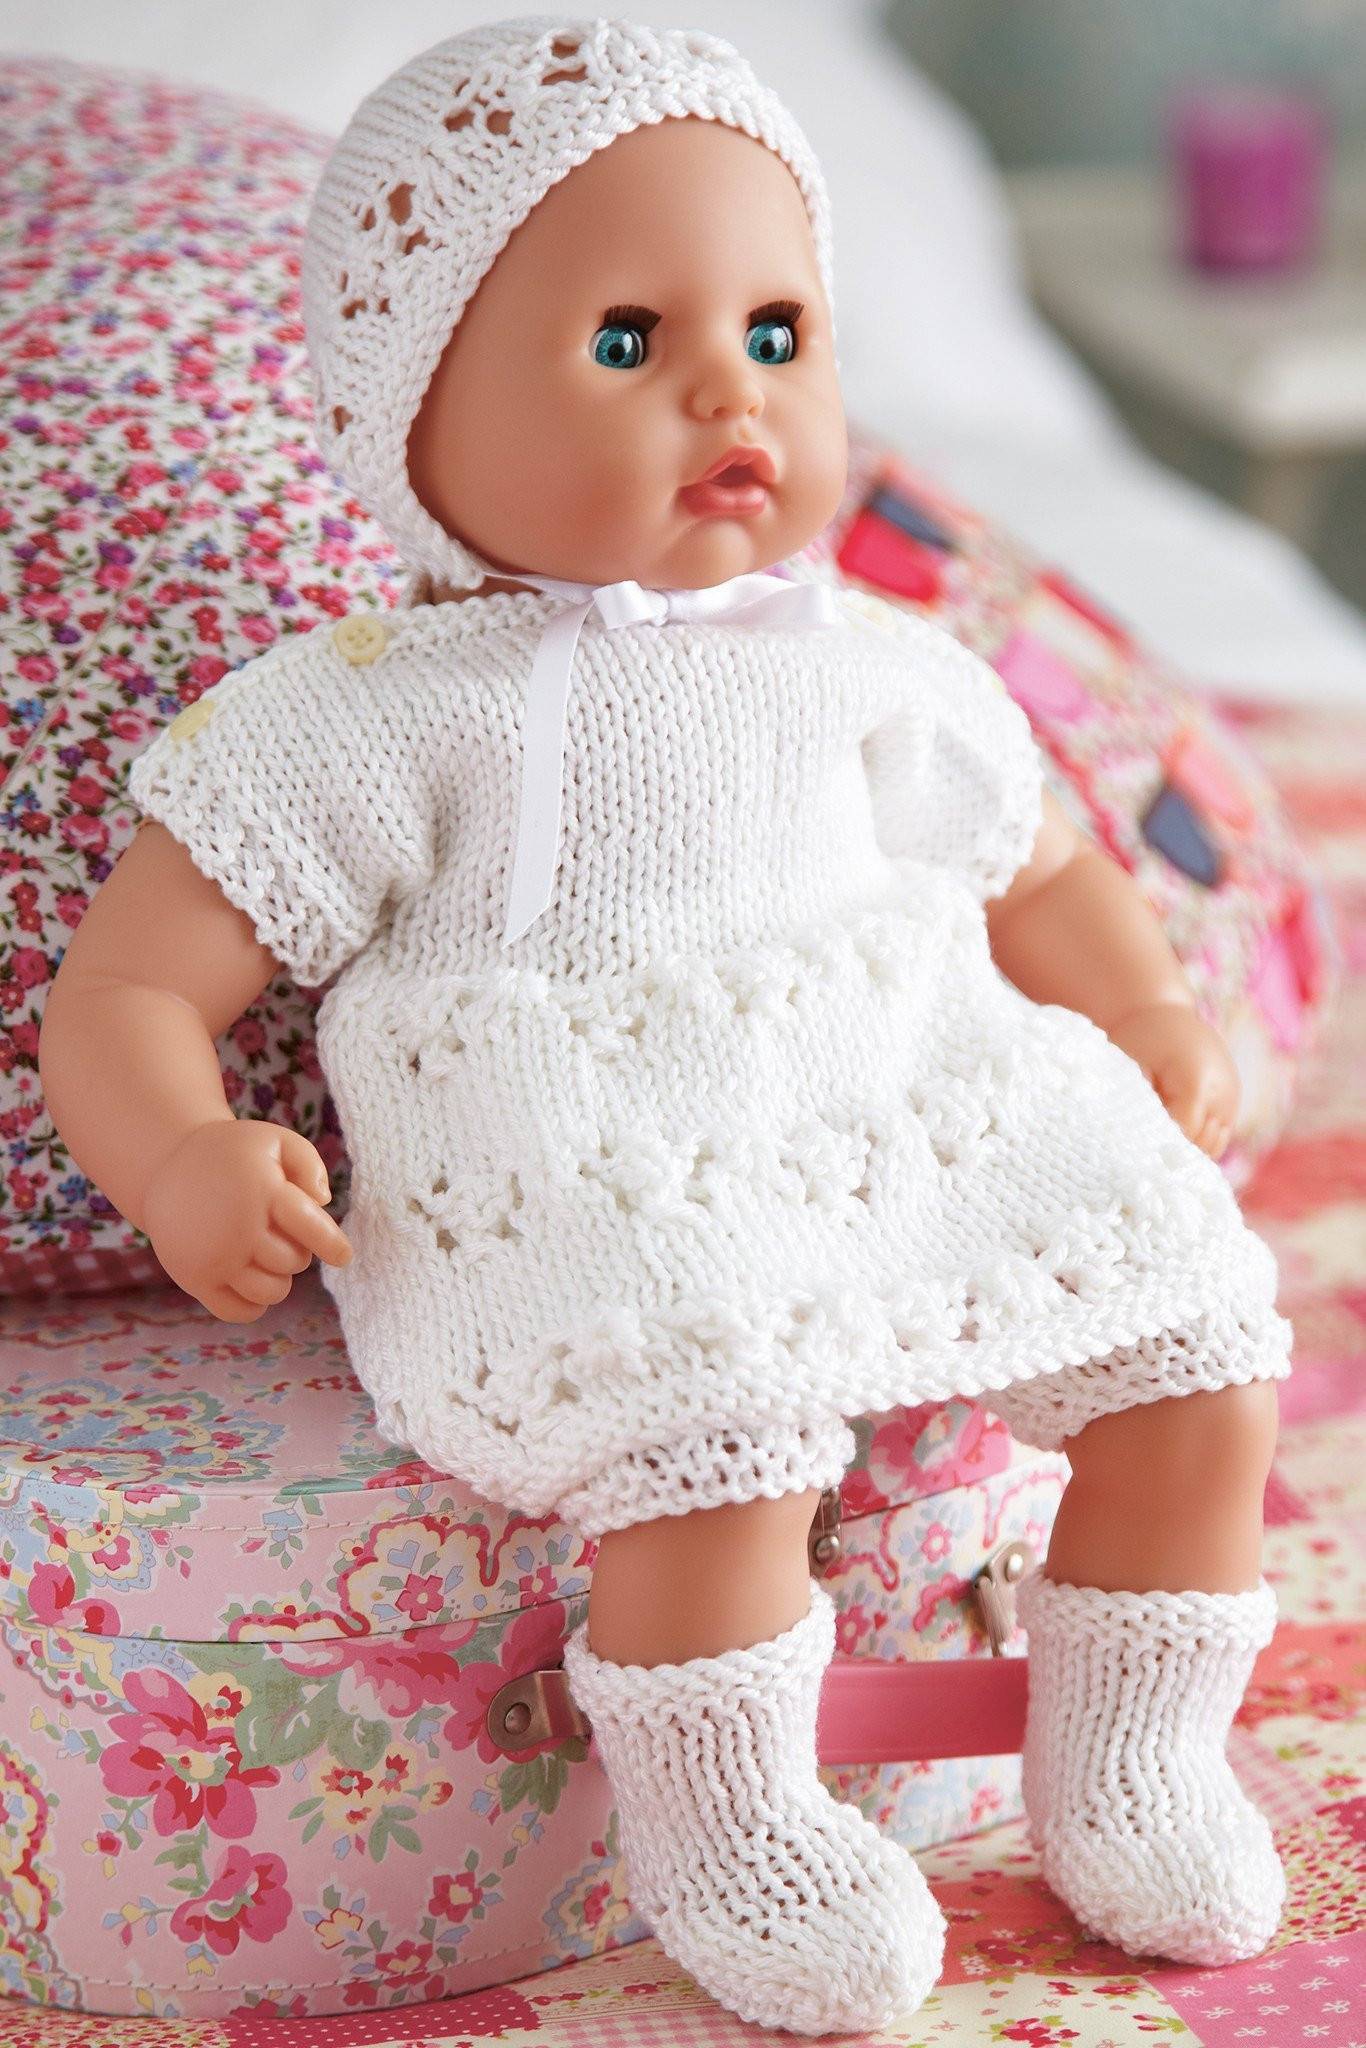 Baby Doll Clothes Set Knitting Pattern The Knitting Network